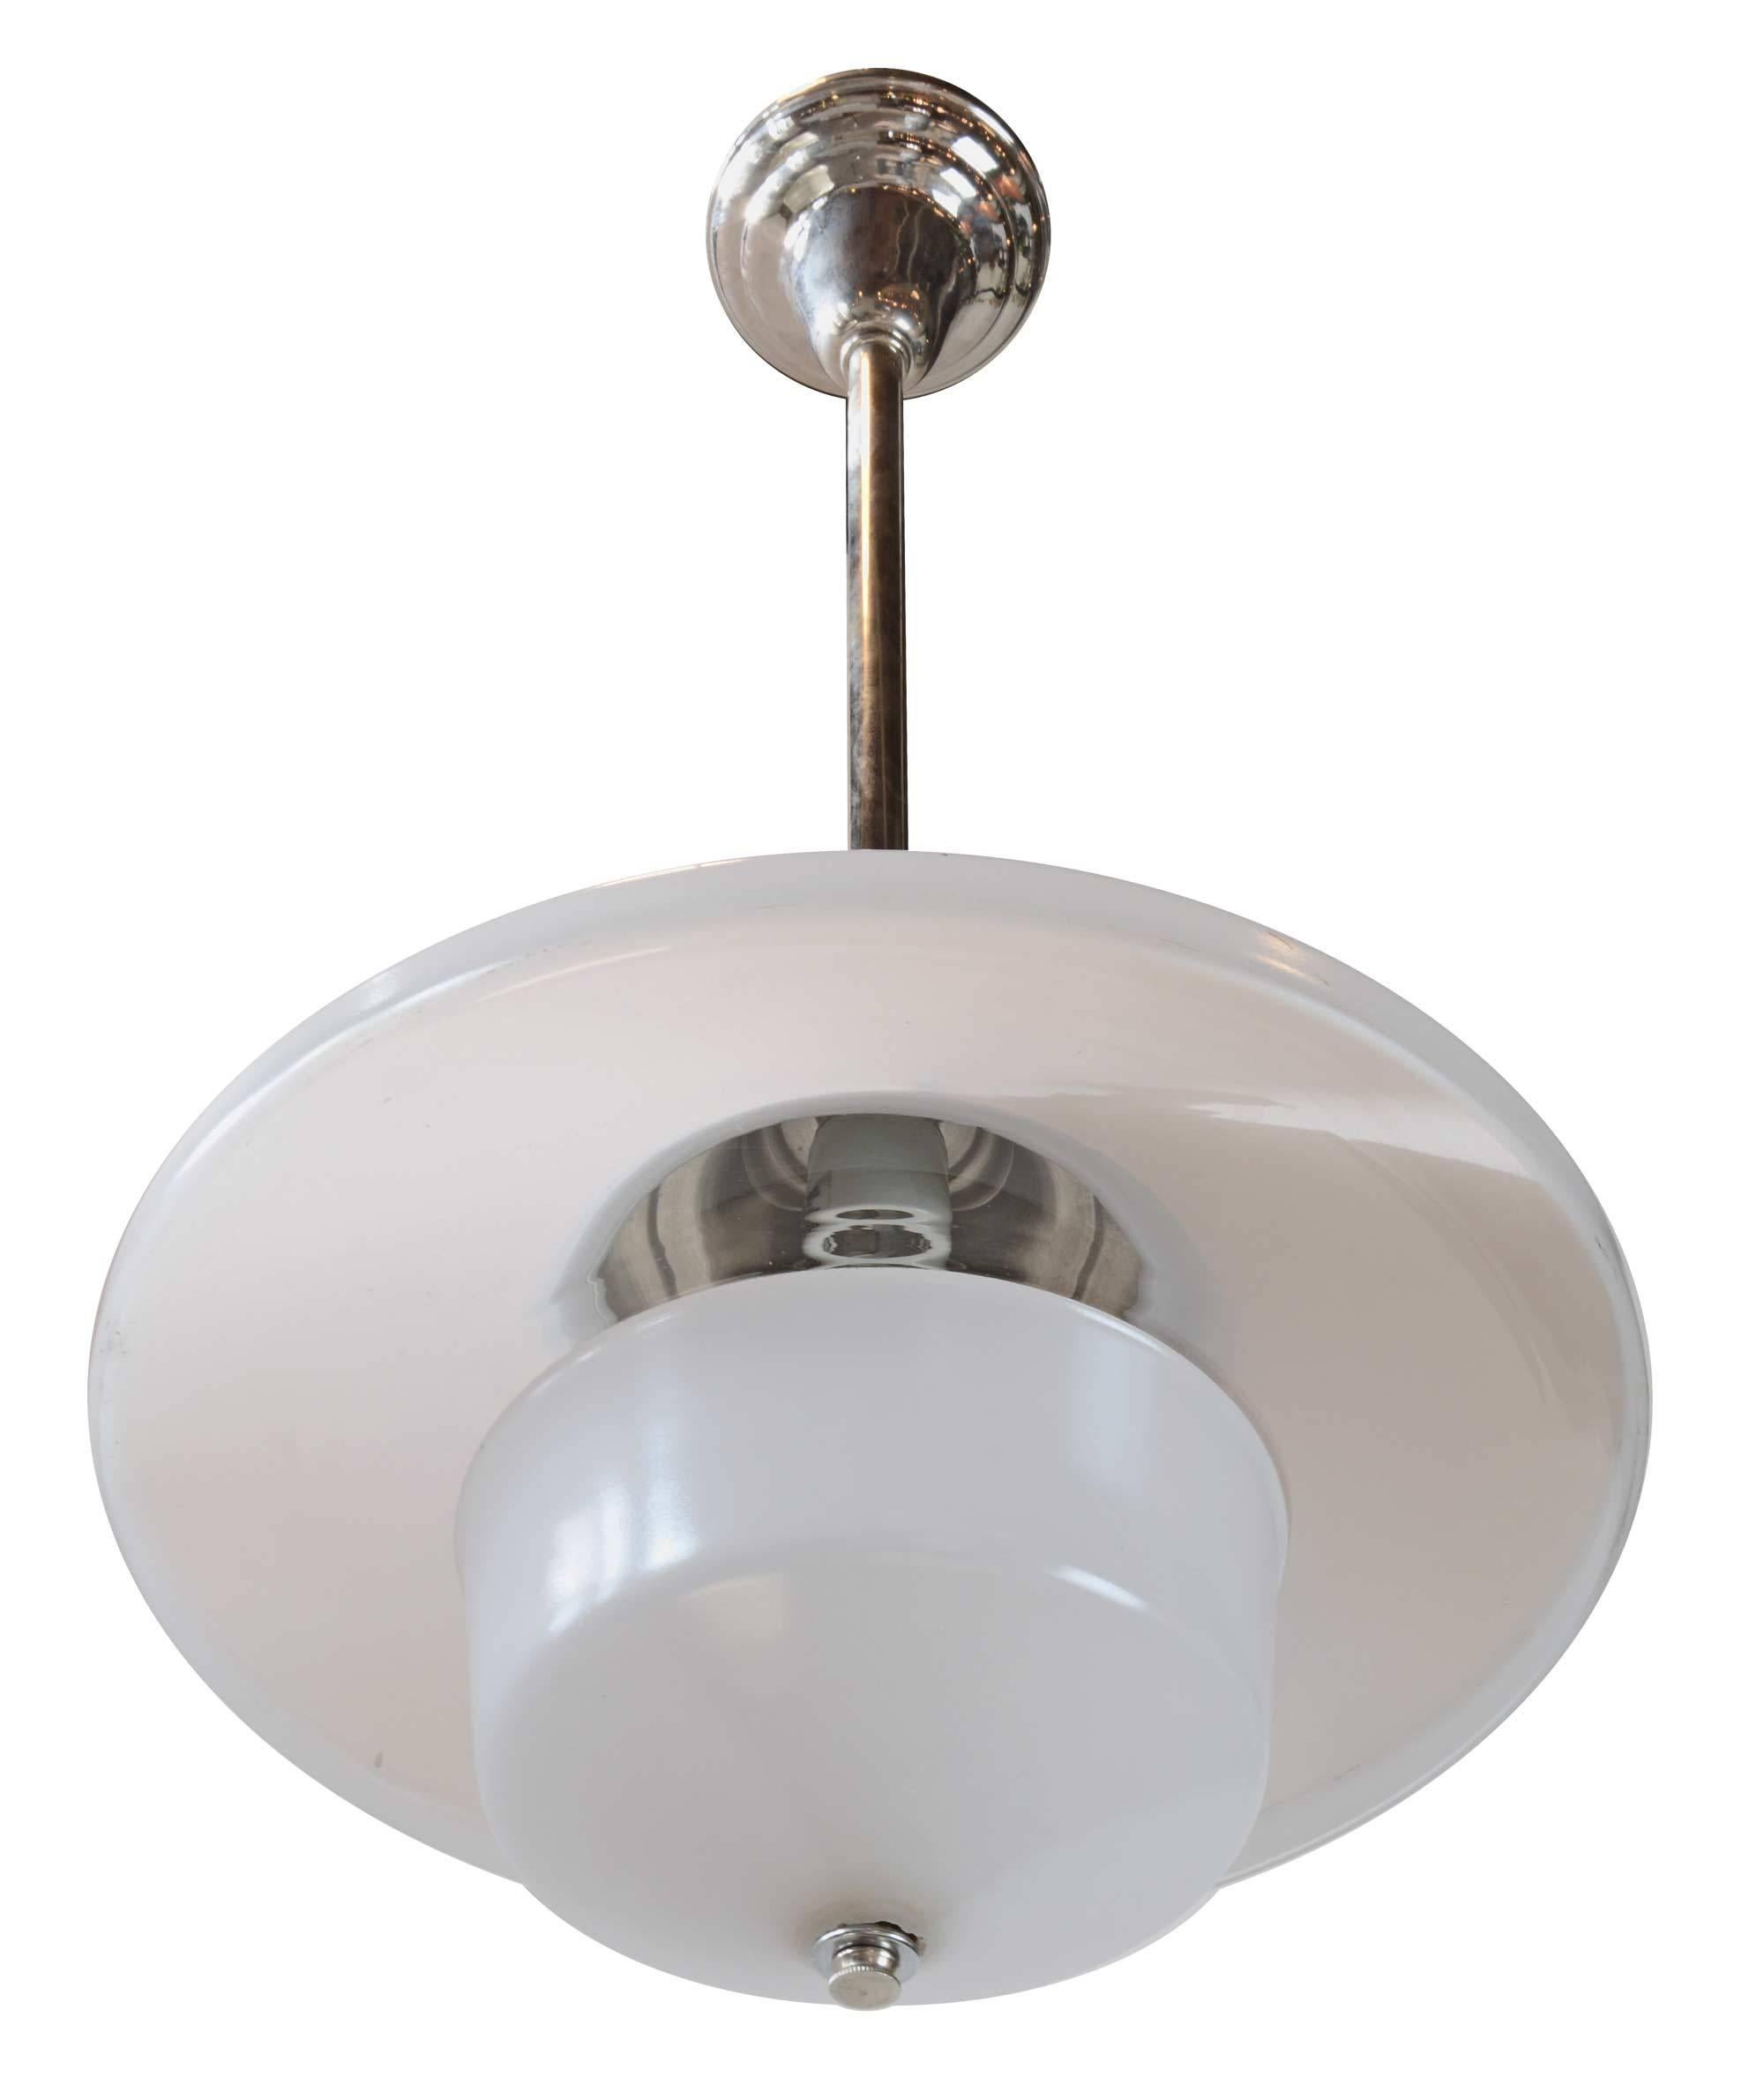 A new chrome pendant paired with a unique early American clear and white glass shade. This Industrial light fixture made circa 1909 sheds a wonderful quality of light. 

Measures: 14" diameter x 29" tall (adjustable).

We find that early